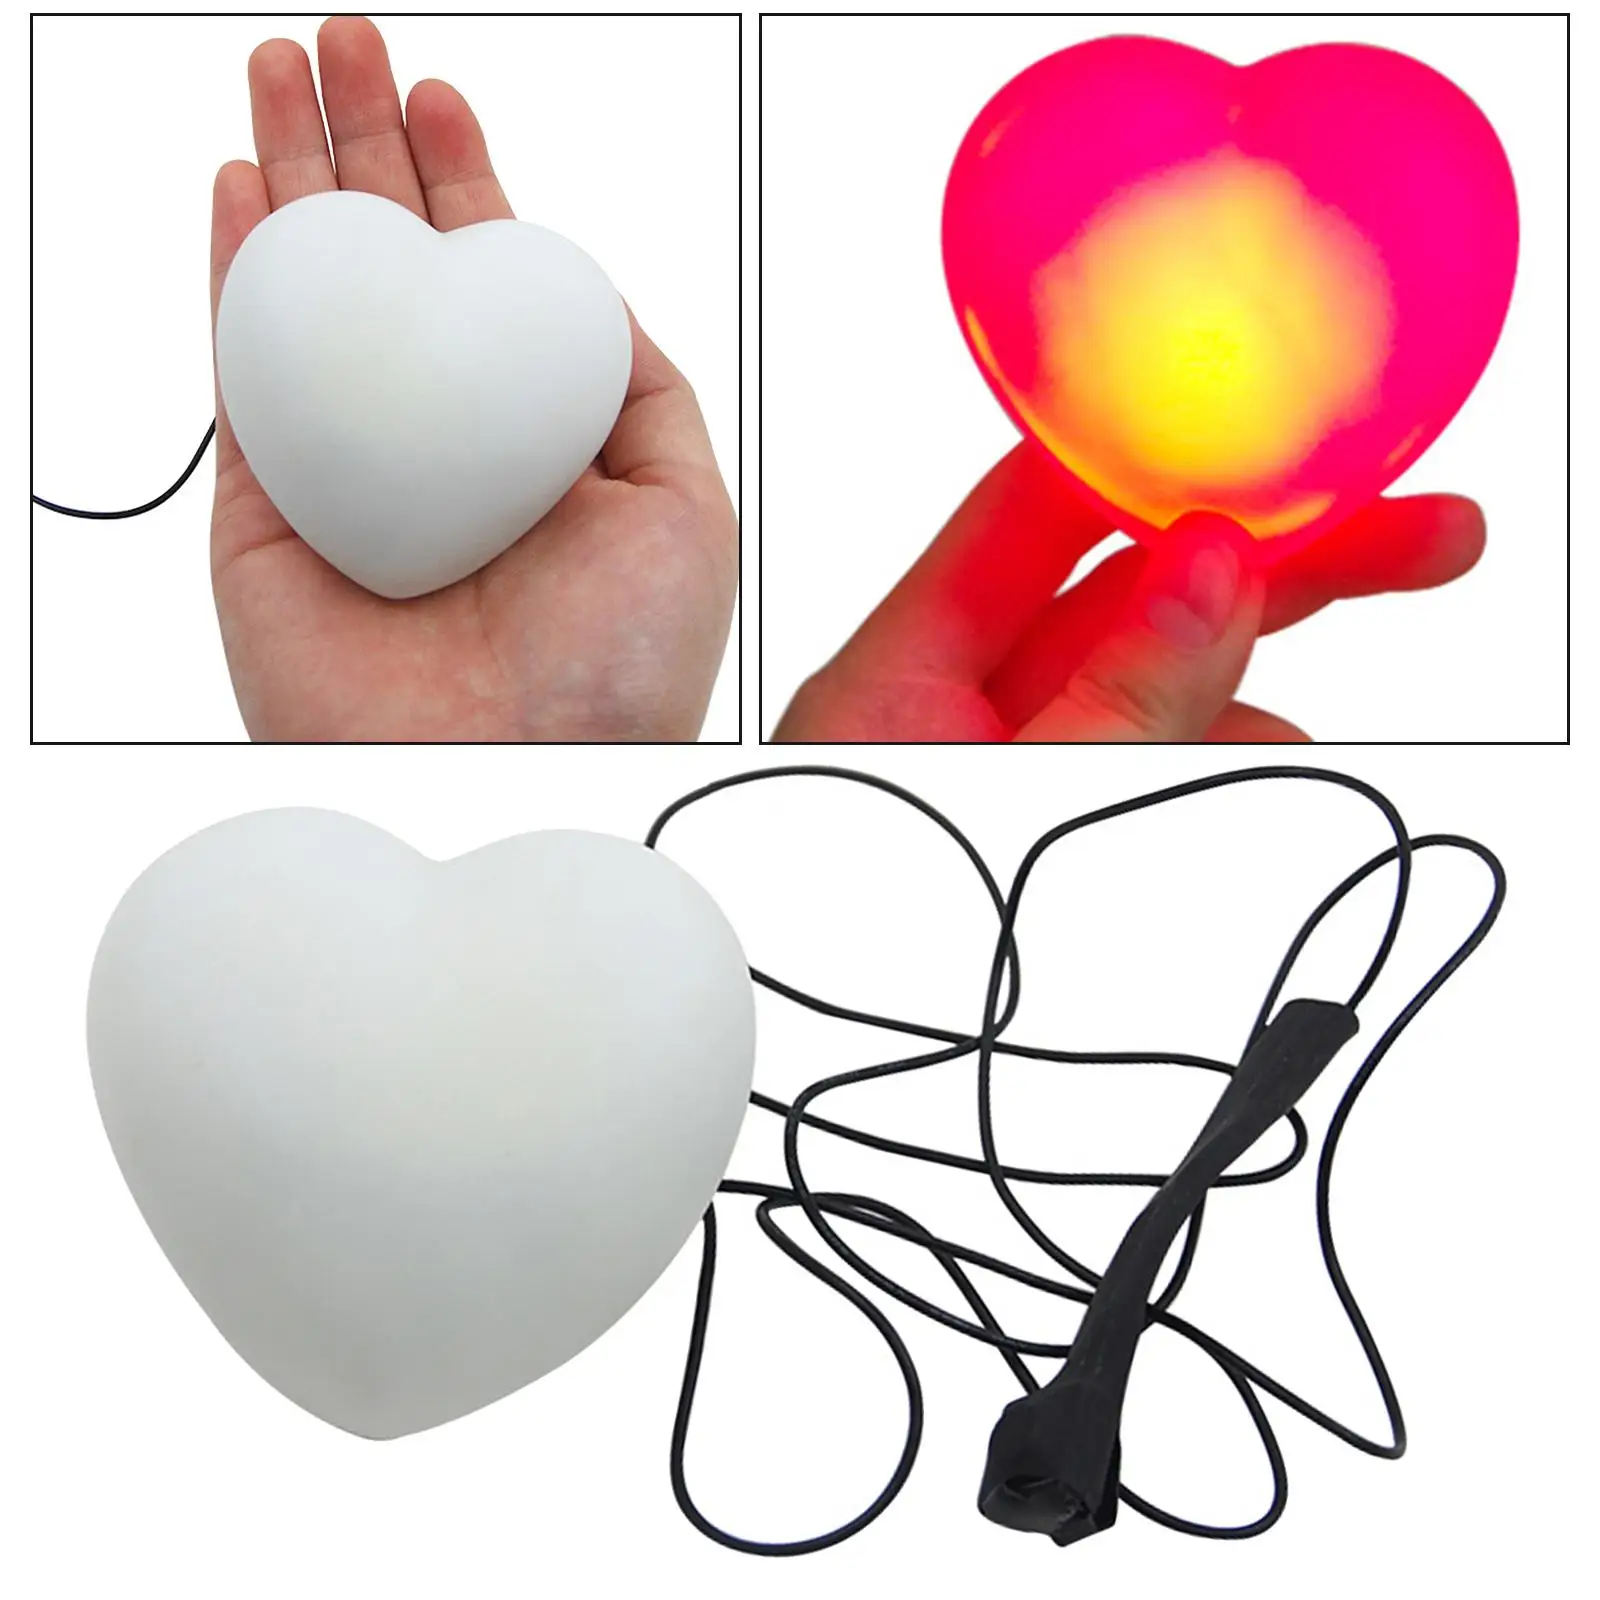 Heart Shaped Light On Chest Comedy Accessories Chest Love Lamp Magic Lights Tricks Chest Heart Shaped for Party